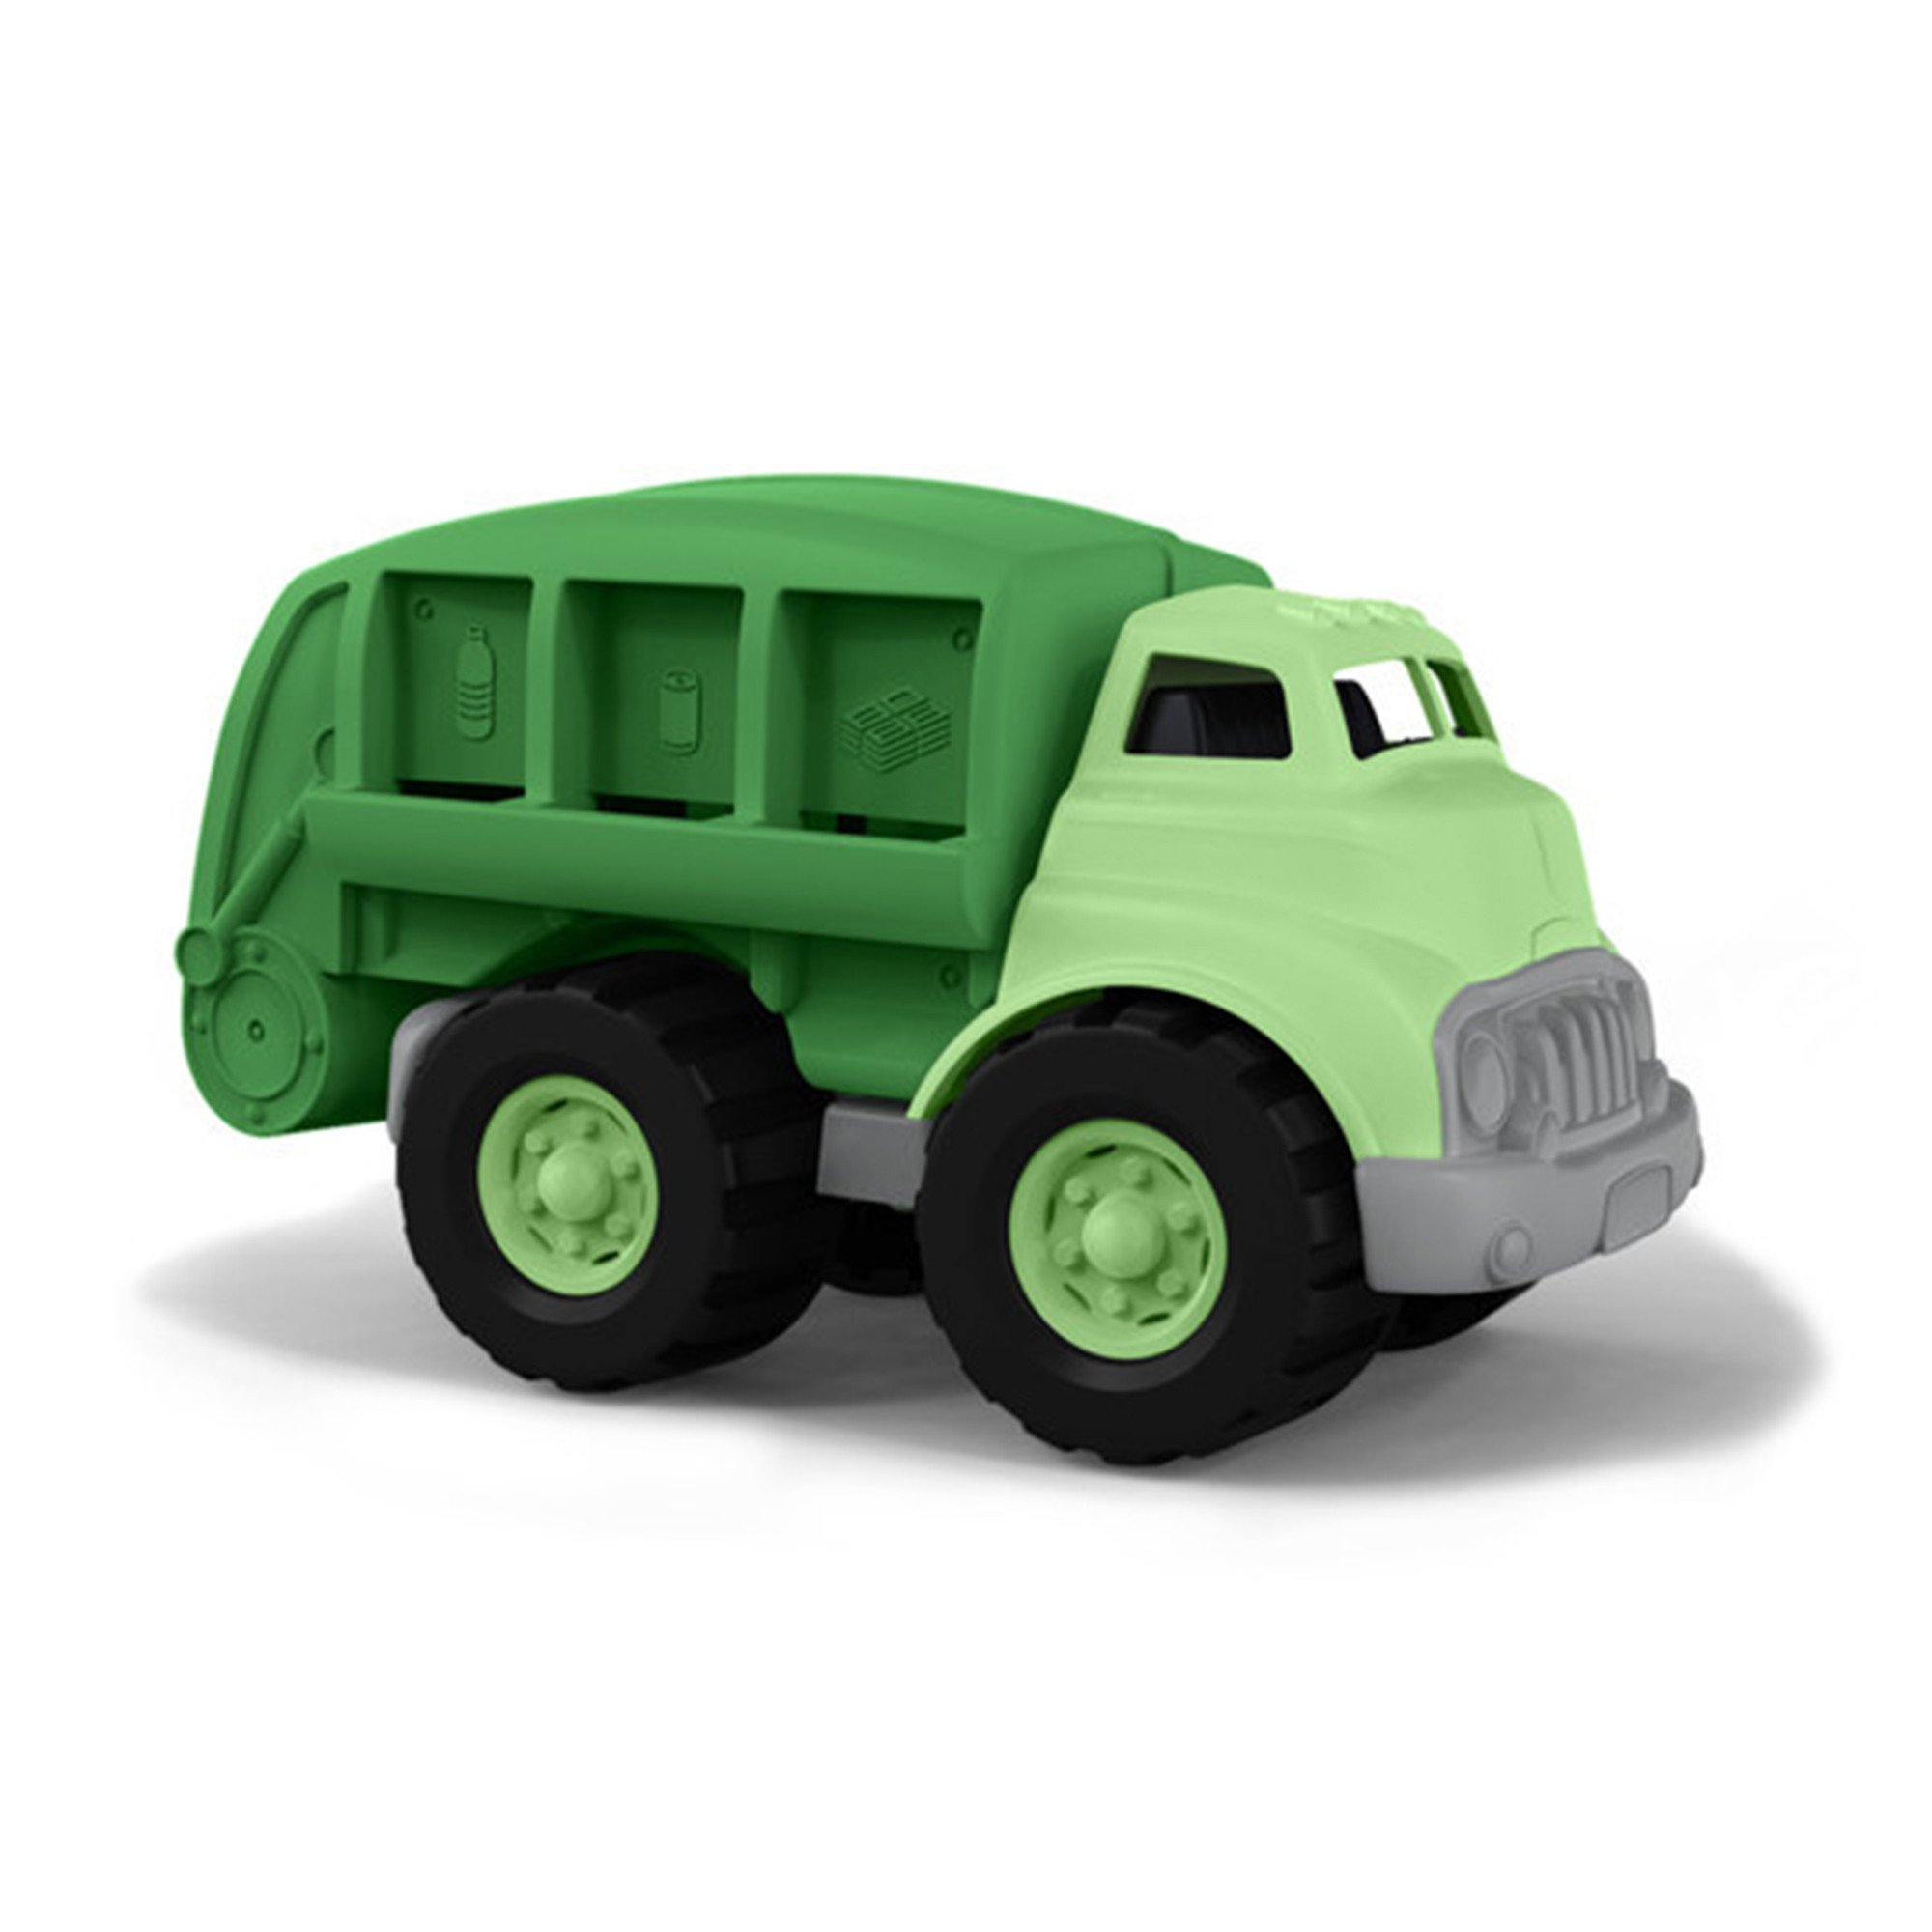 Green Toys Recycling Truck - Little Earth Nest